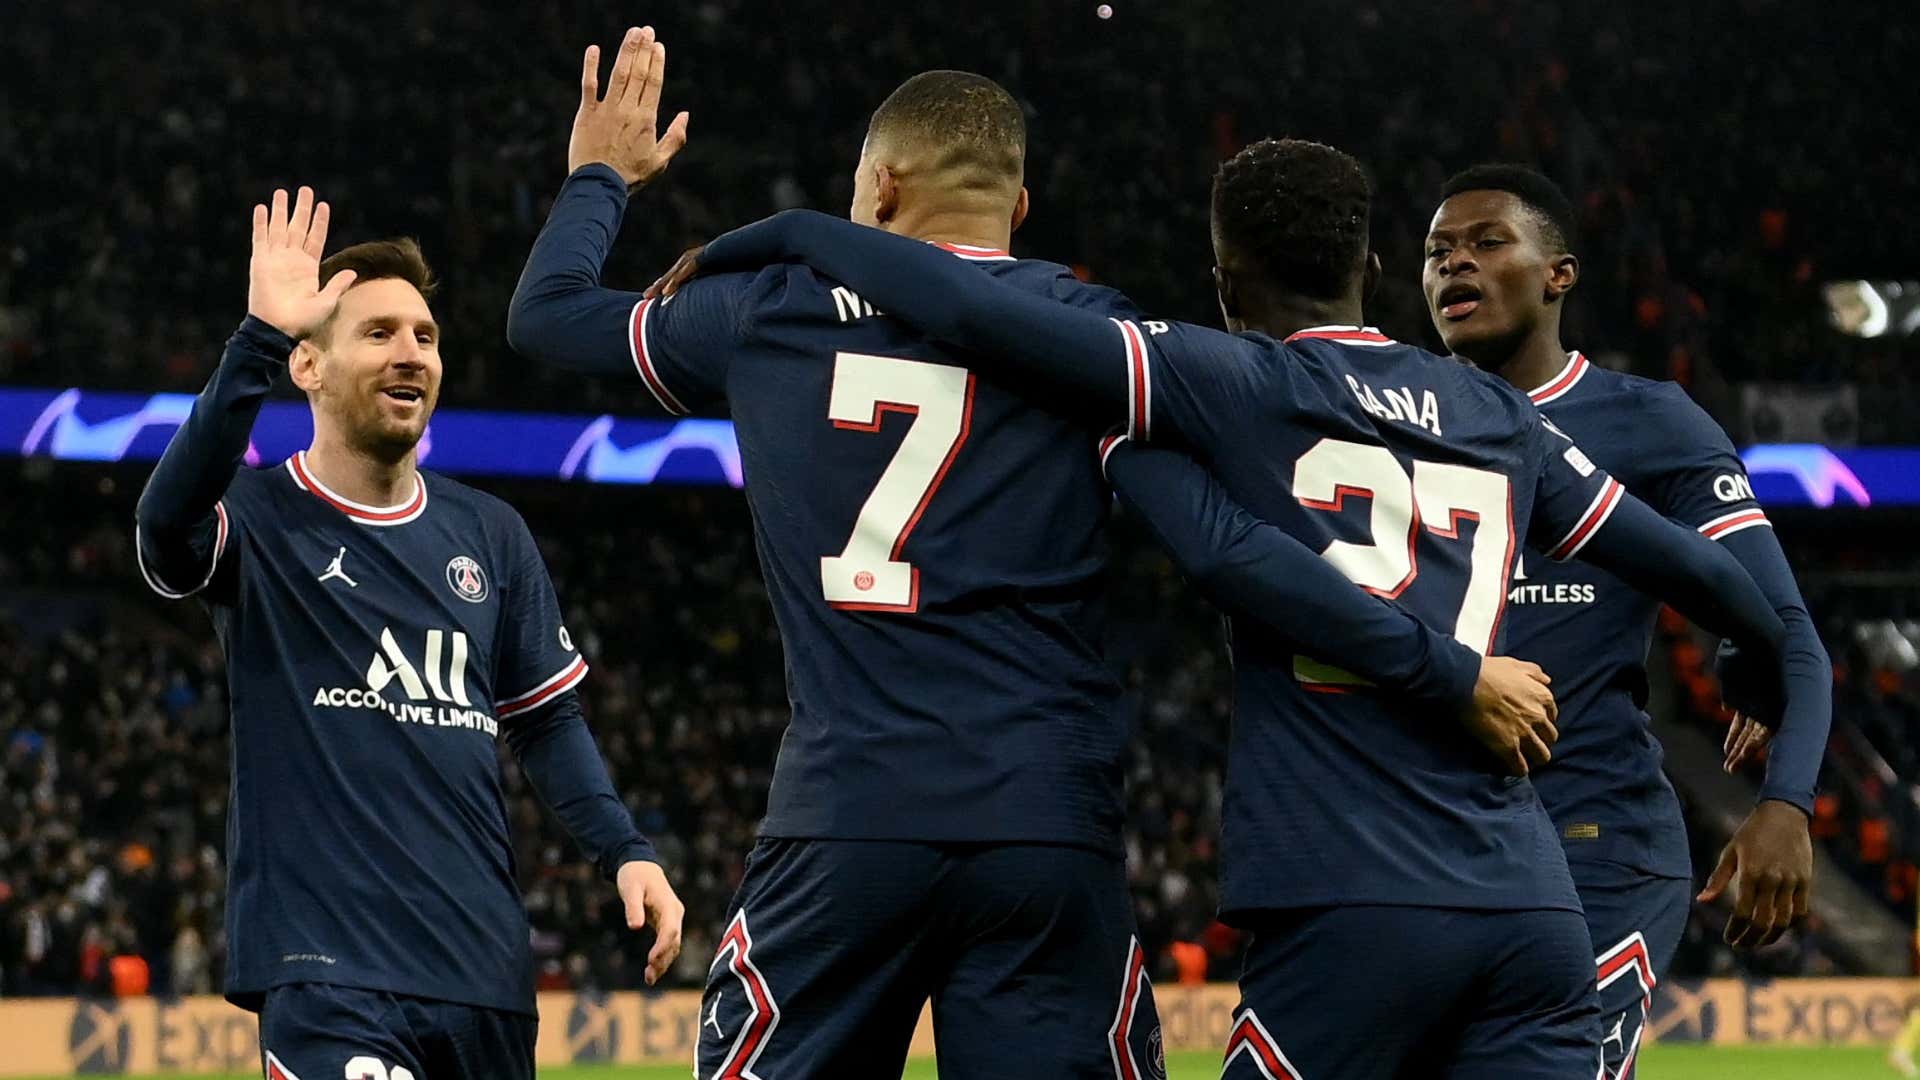 Mbappe beats Messi’s record to become youngest player to reach 30 Champions League goals